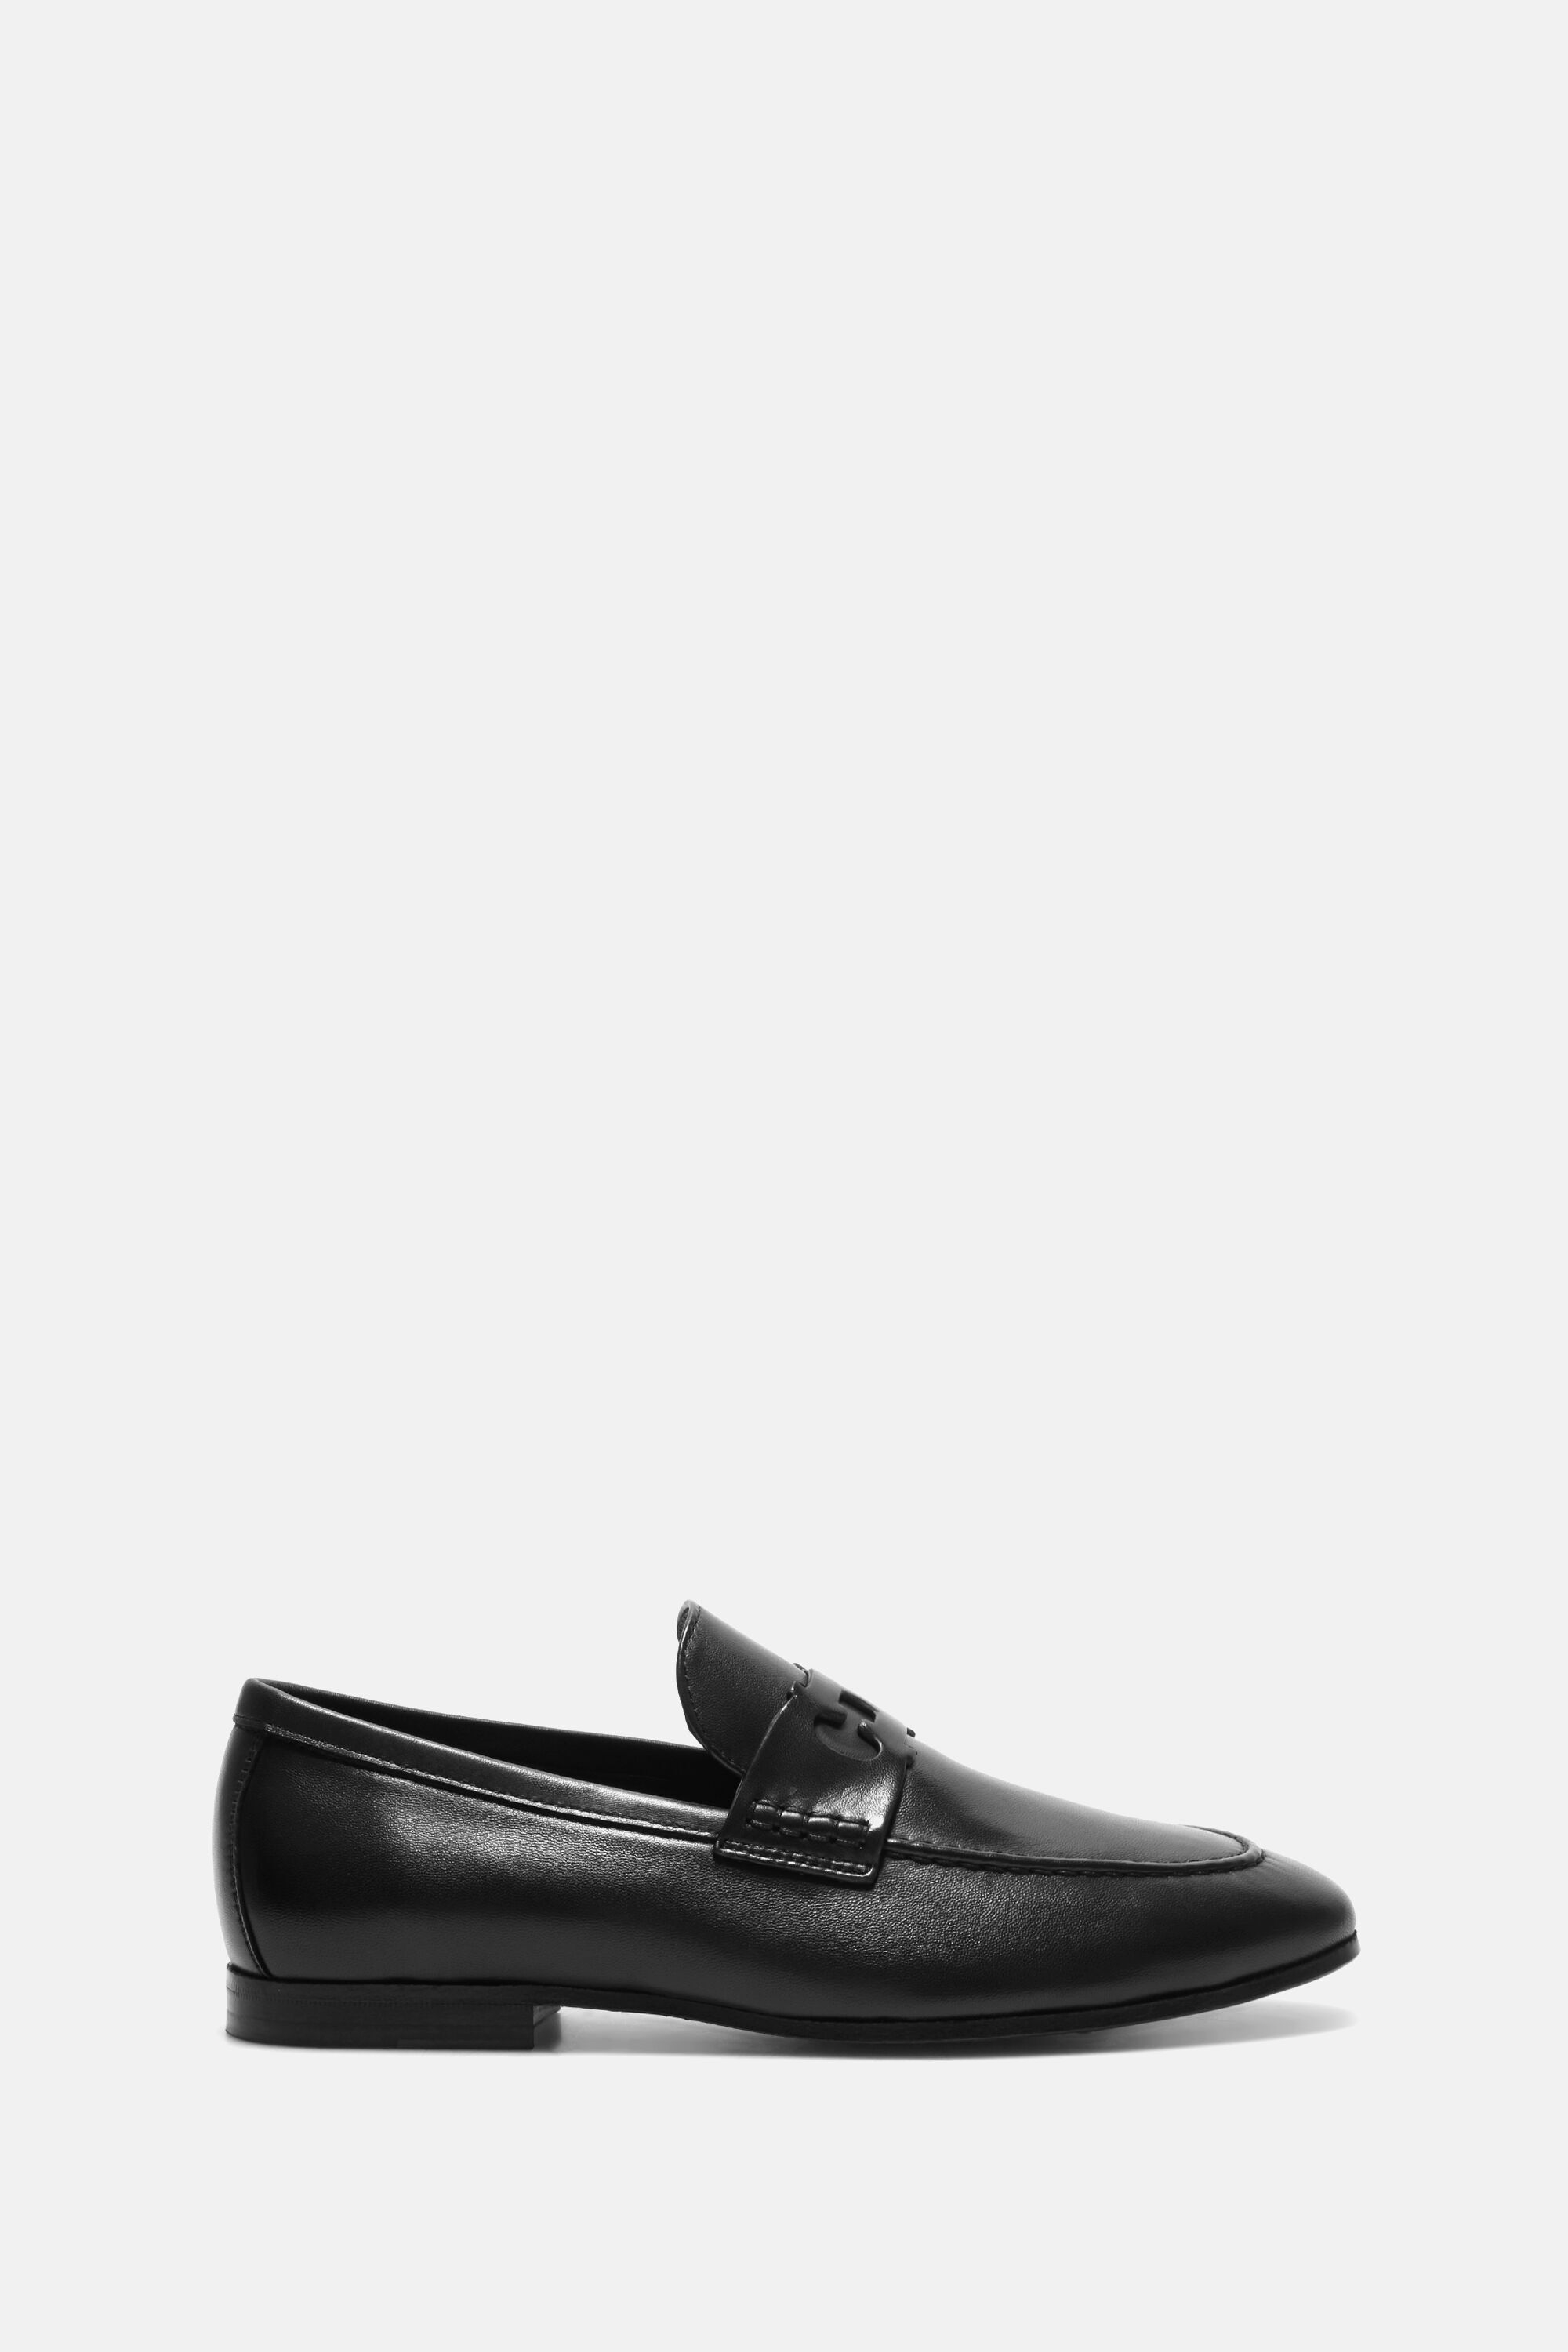 Initials Insignia cutout leather loafers